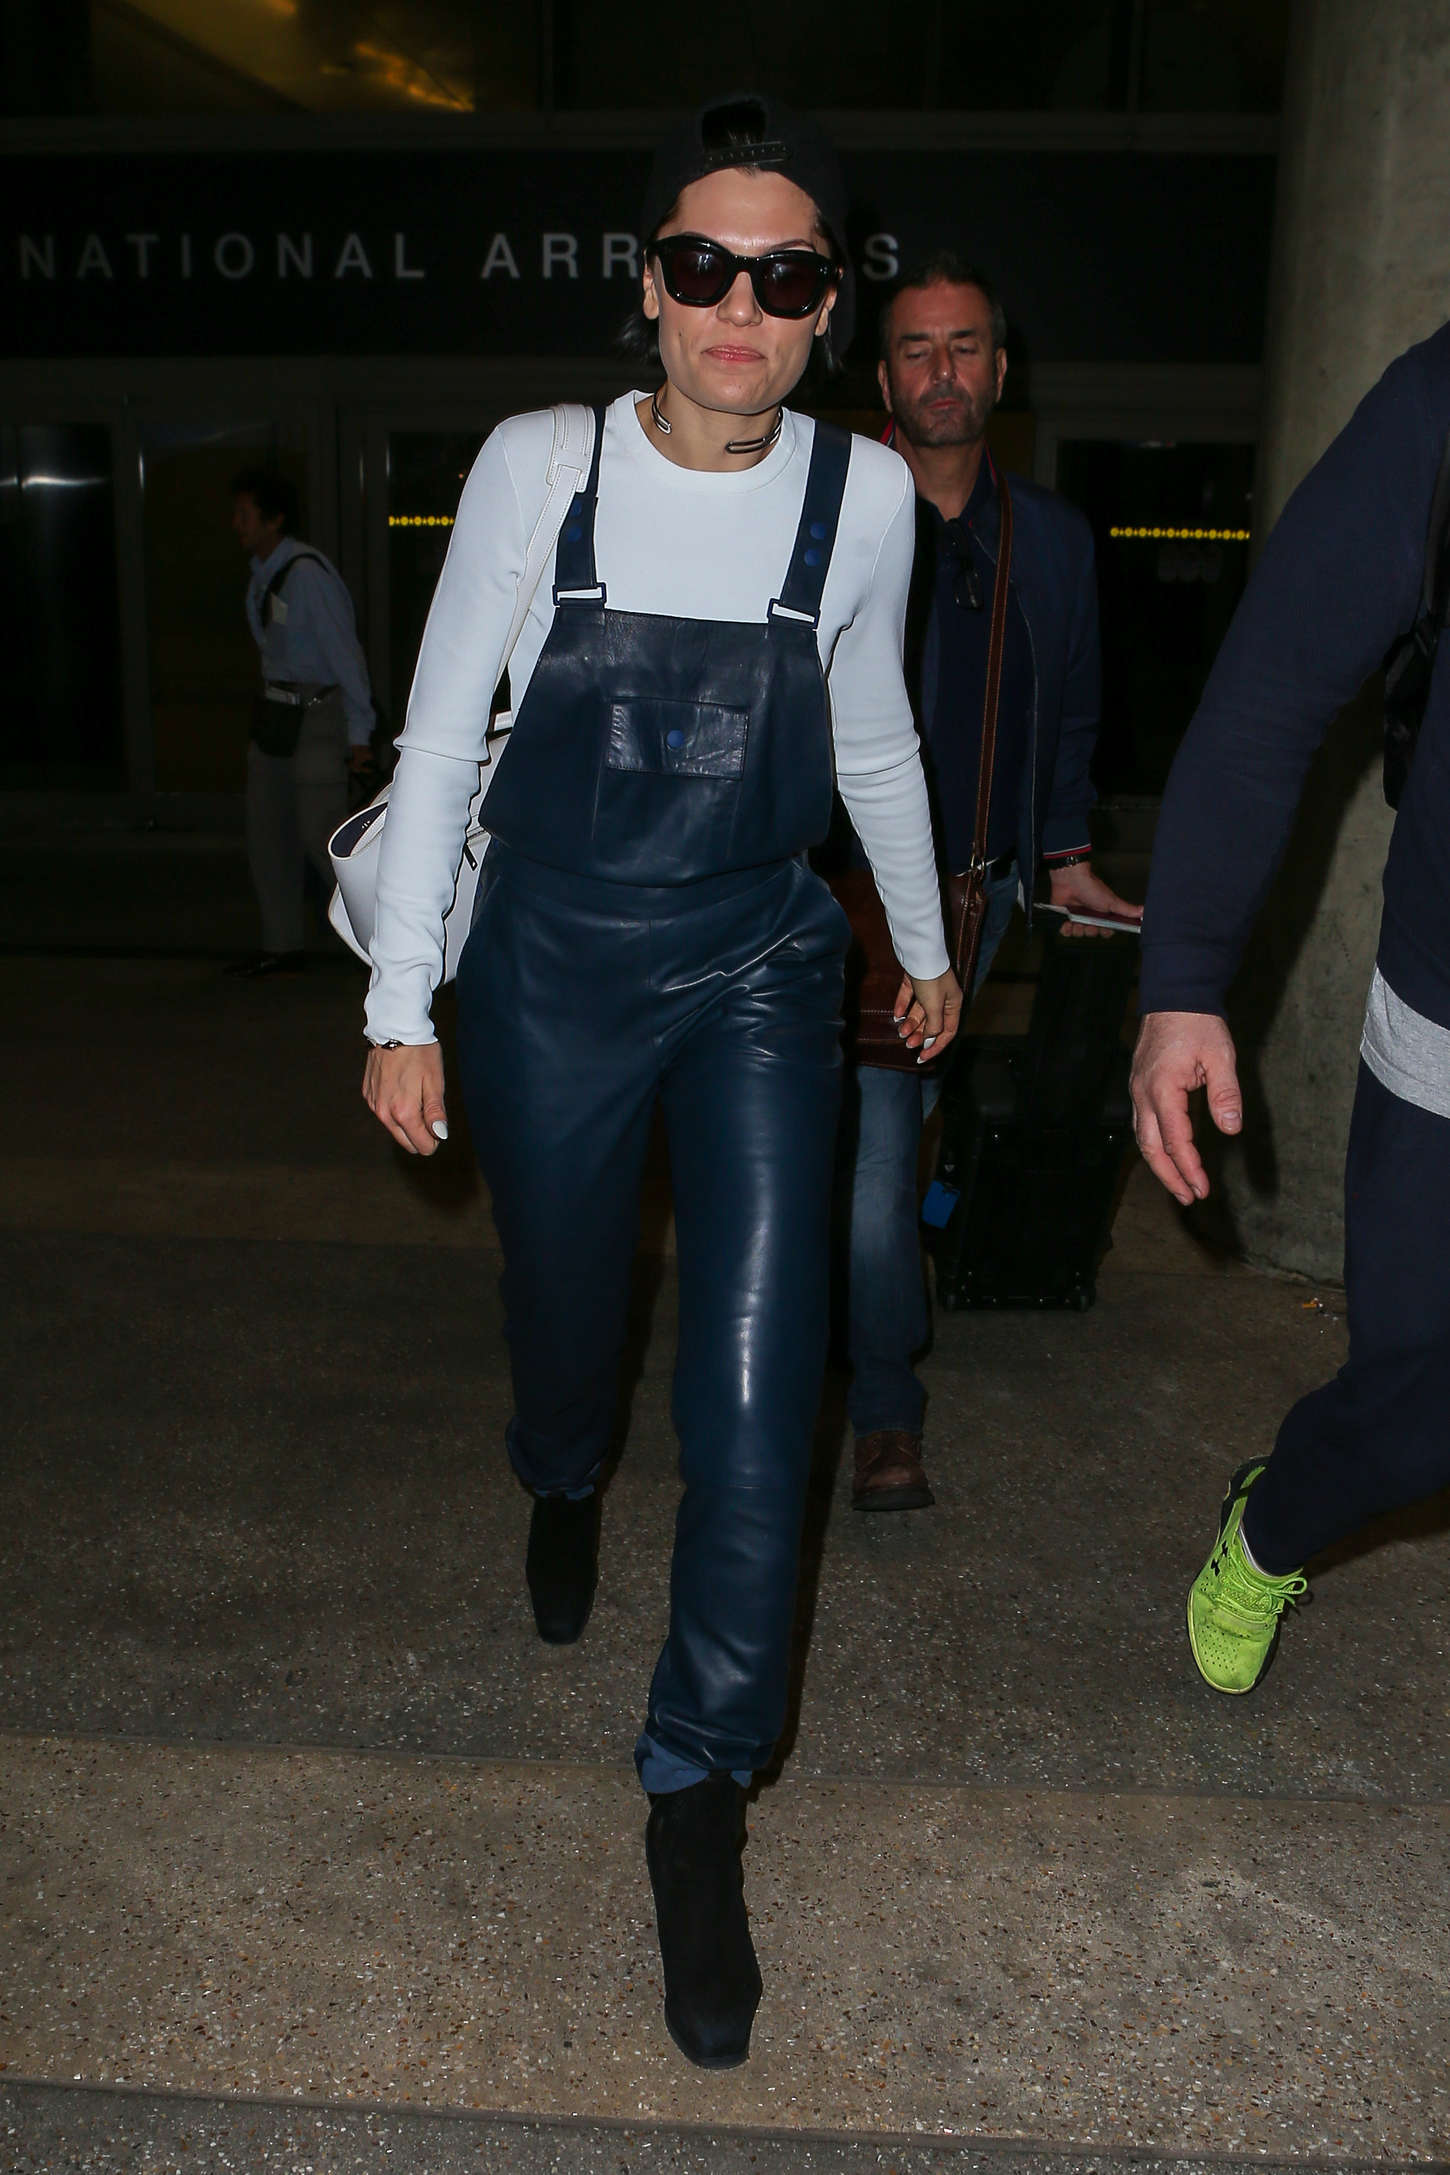 Jessie J arriving at LAX airport in Los Angeles